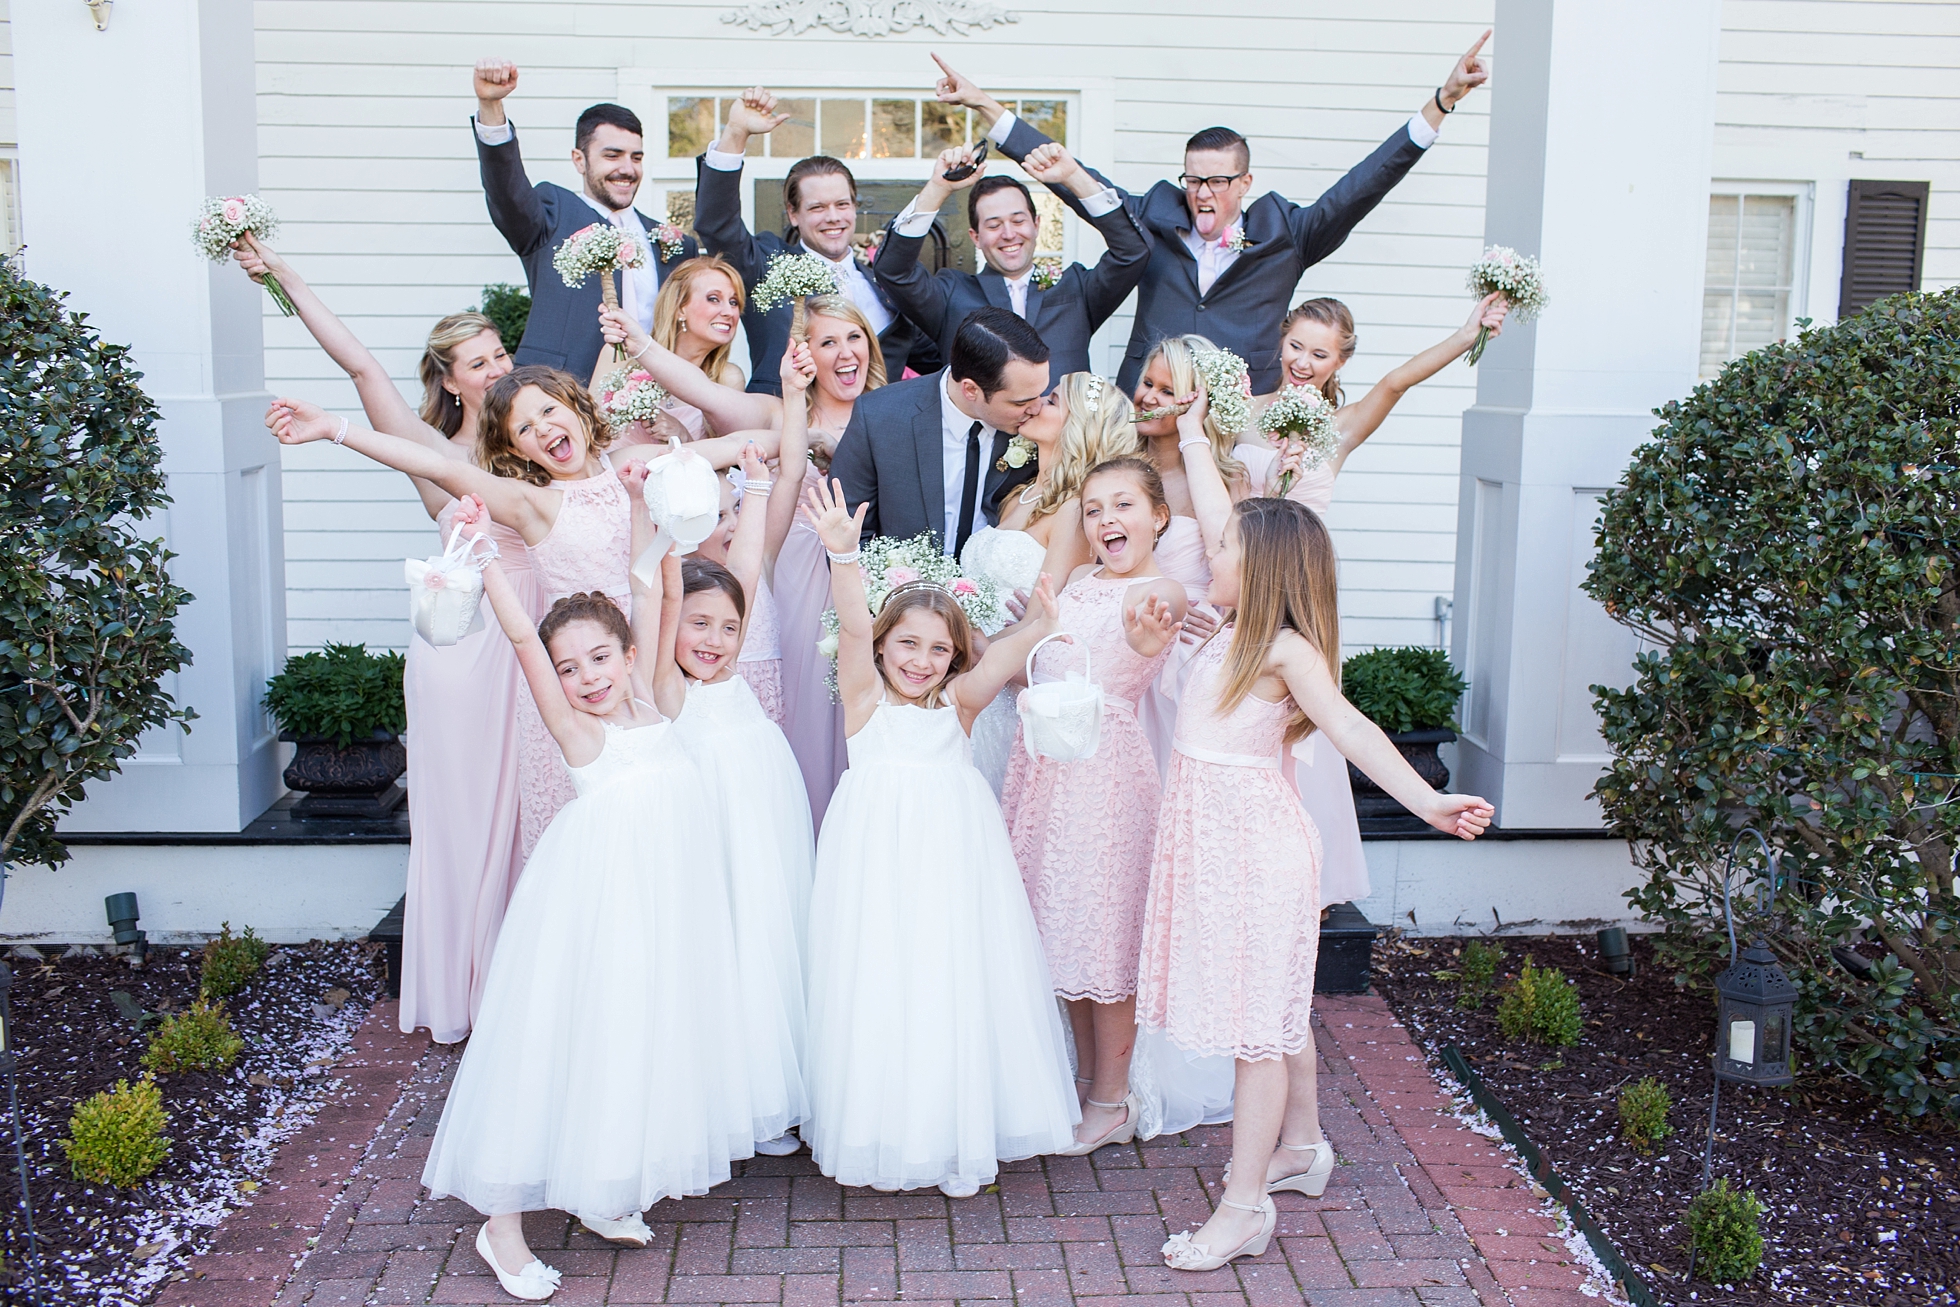 fun silly bridal party